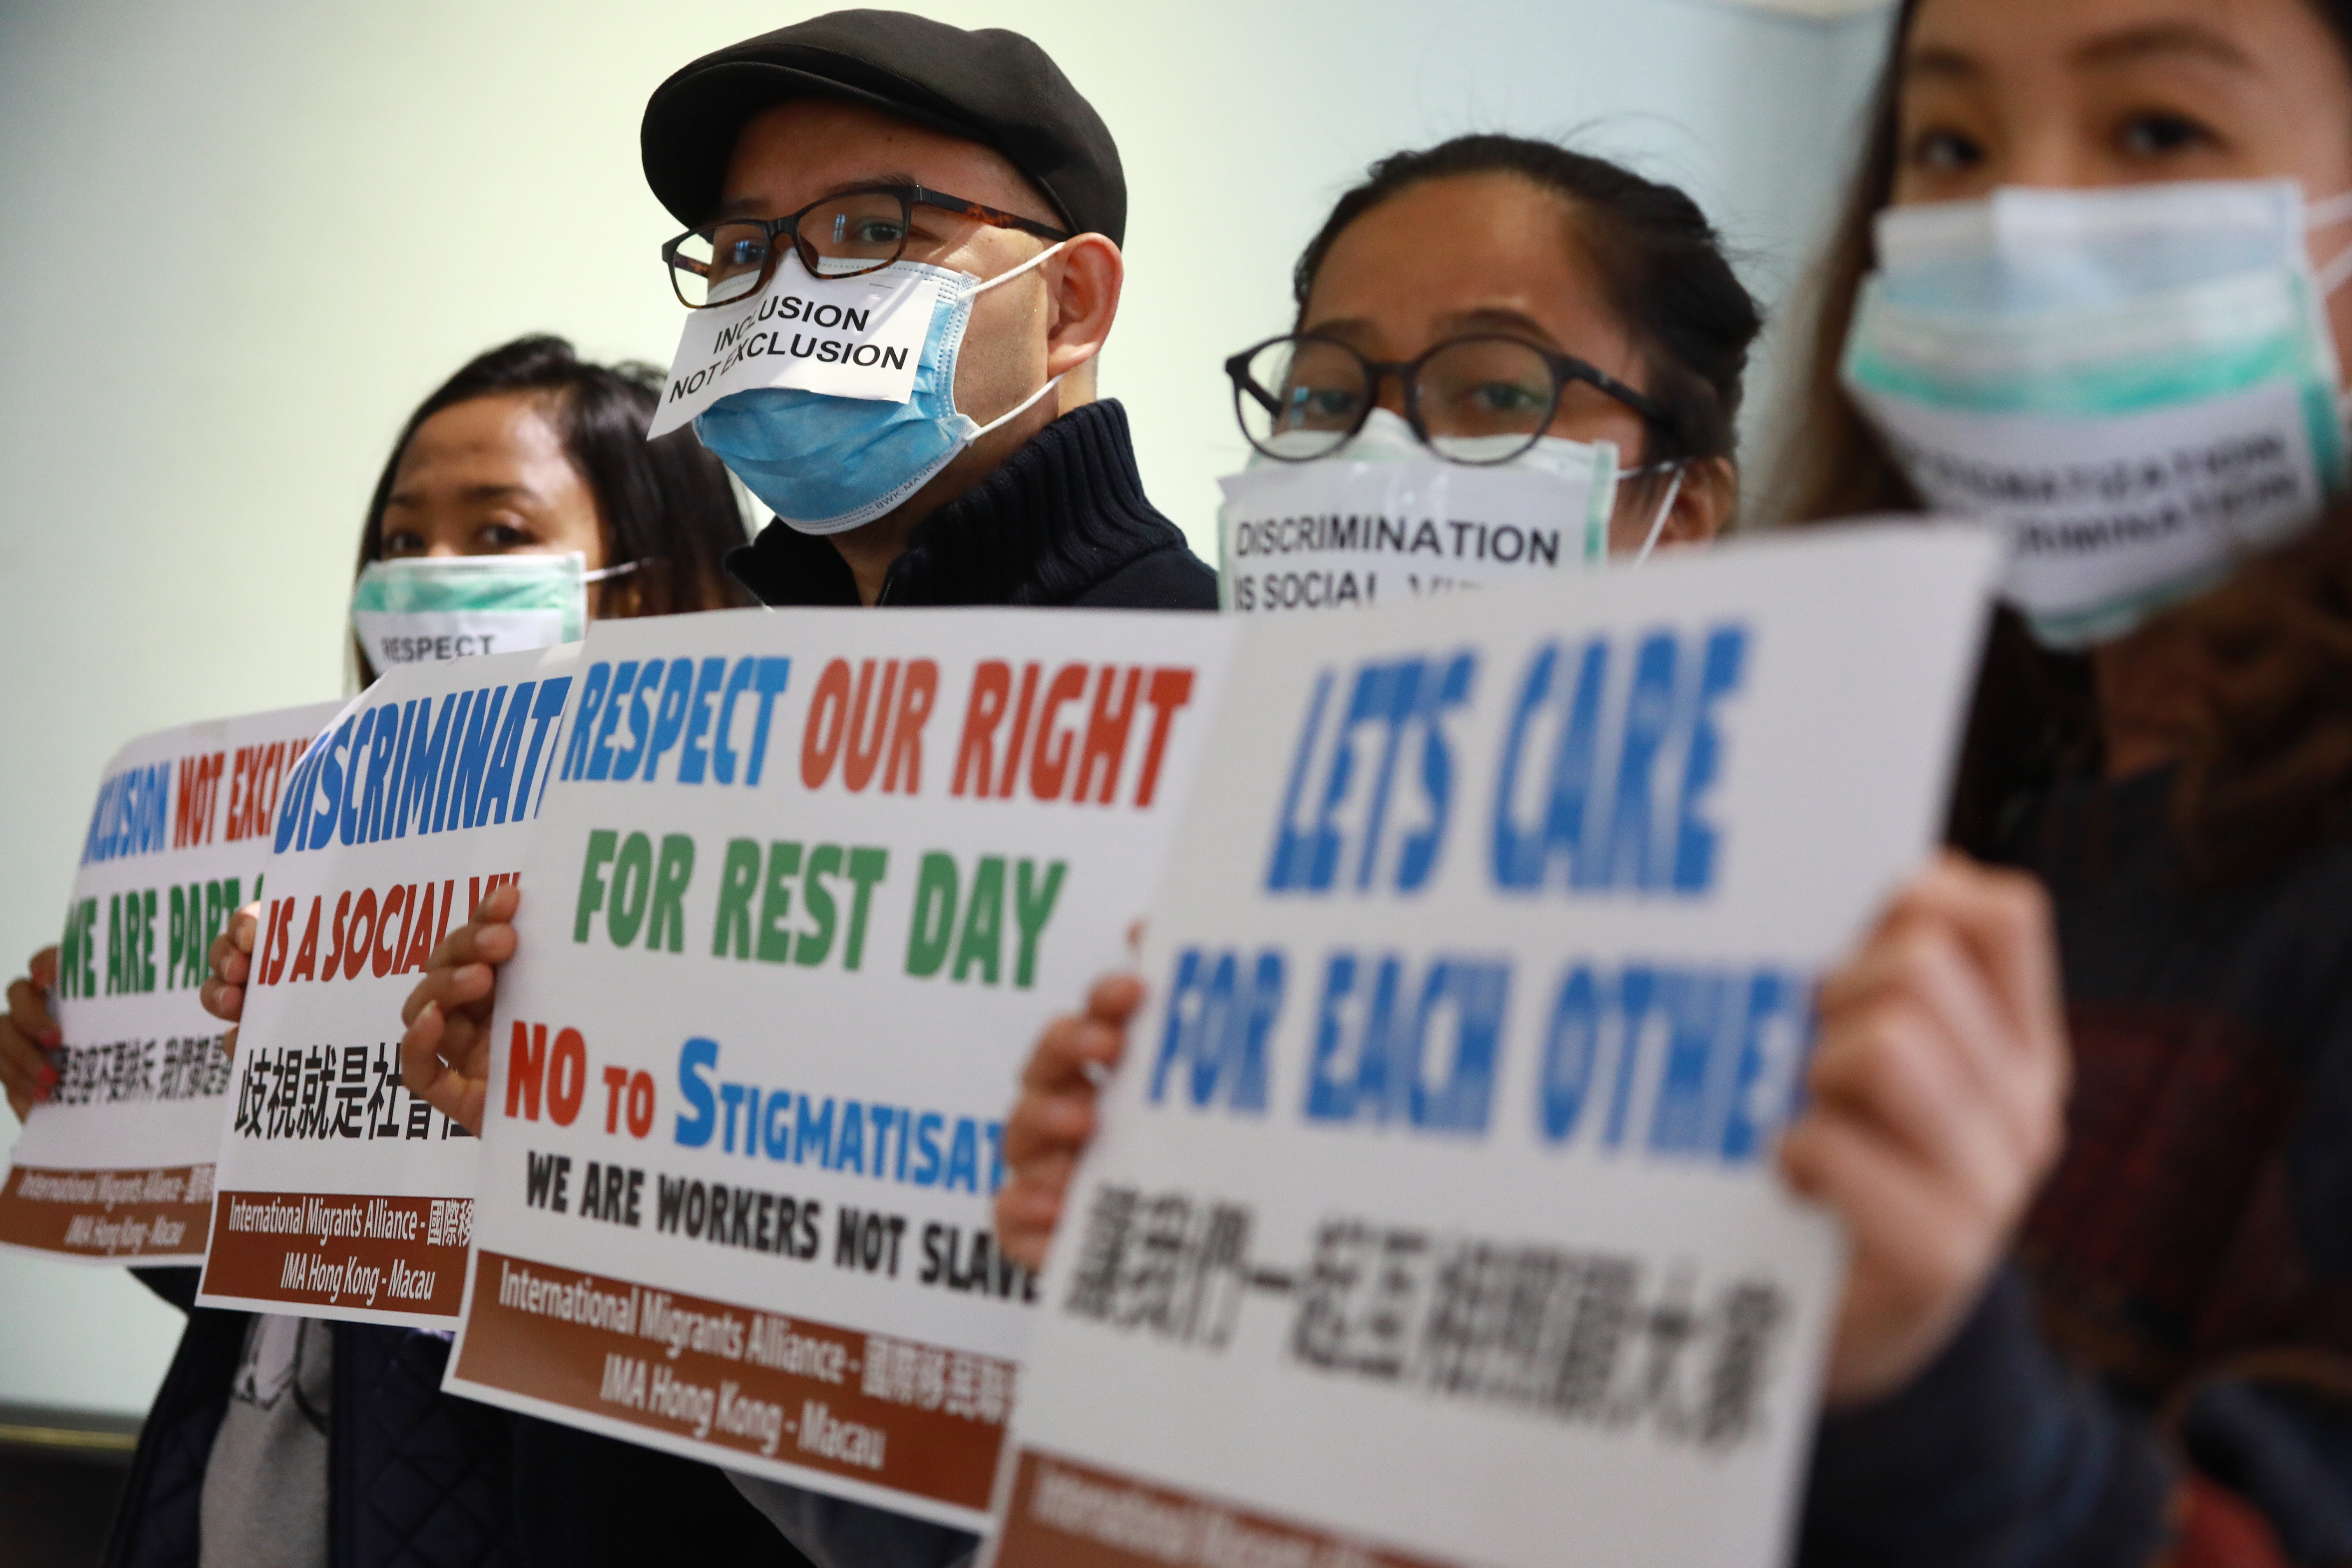 Representatives from multiple immigrant rights groups attend a press conference on domestic workers facing discrimination during Wuhan coronavirus outbreak. Photo: May Tse